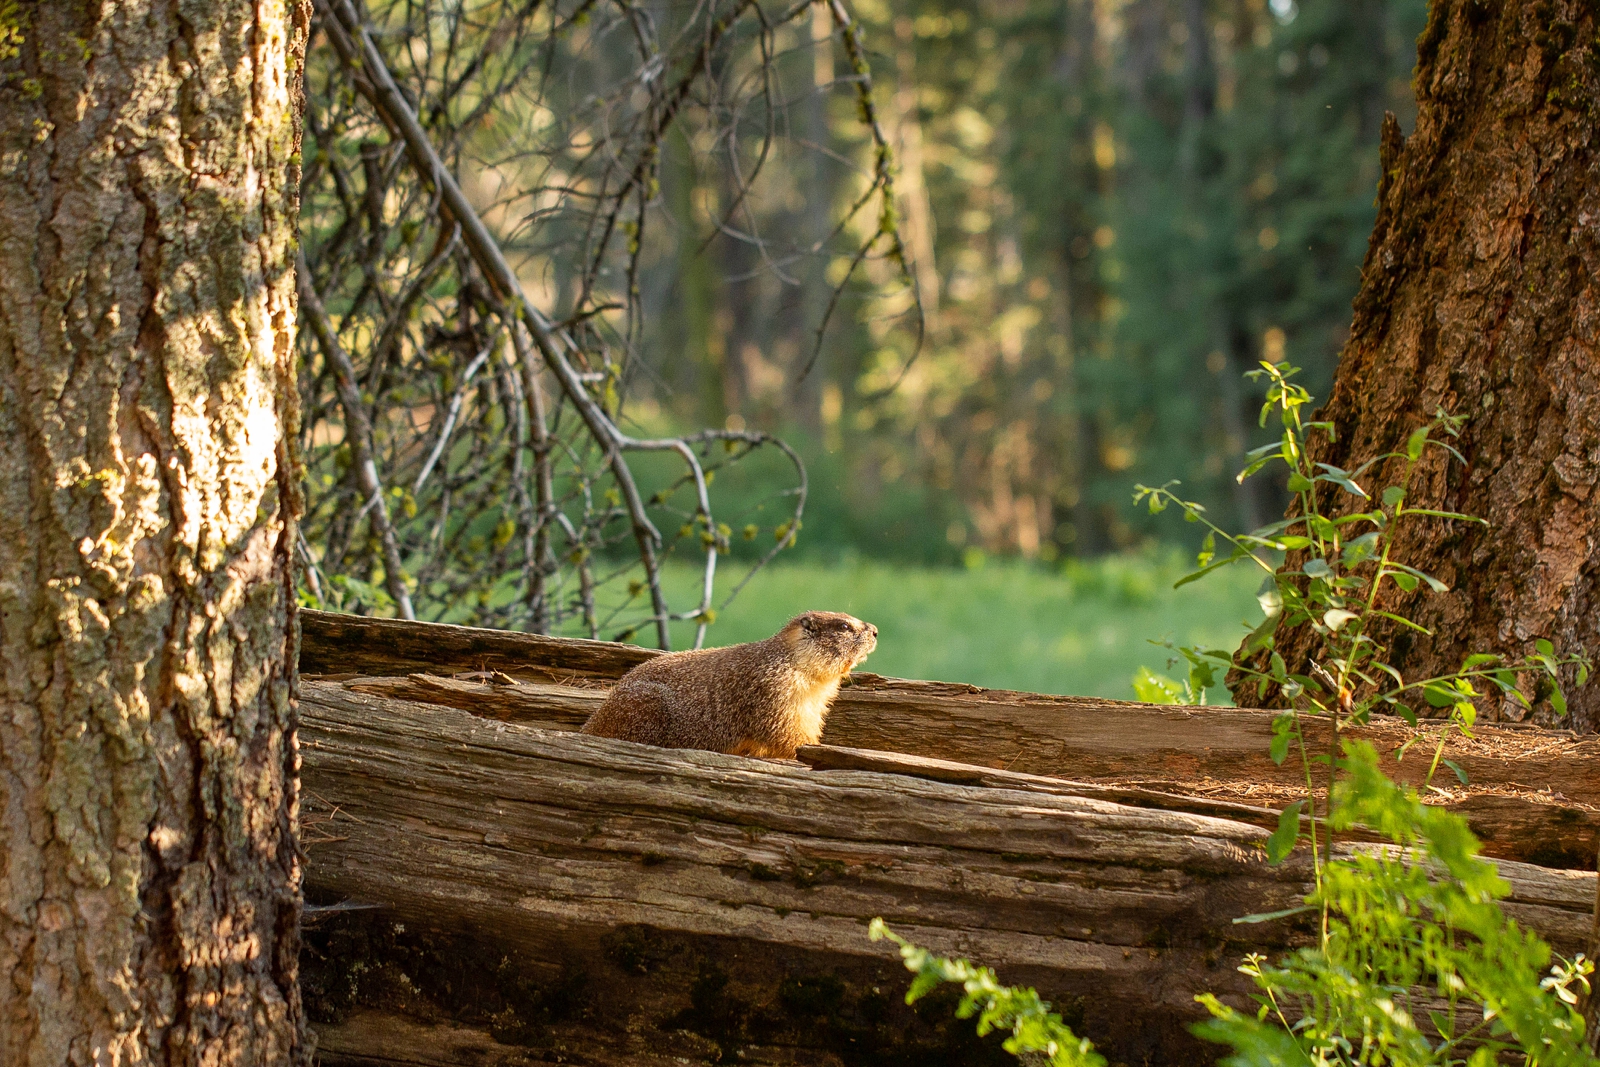 A marmot at a Sequoia National Park engagement session.